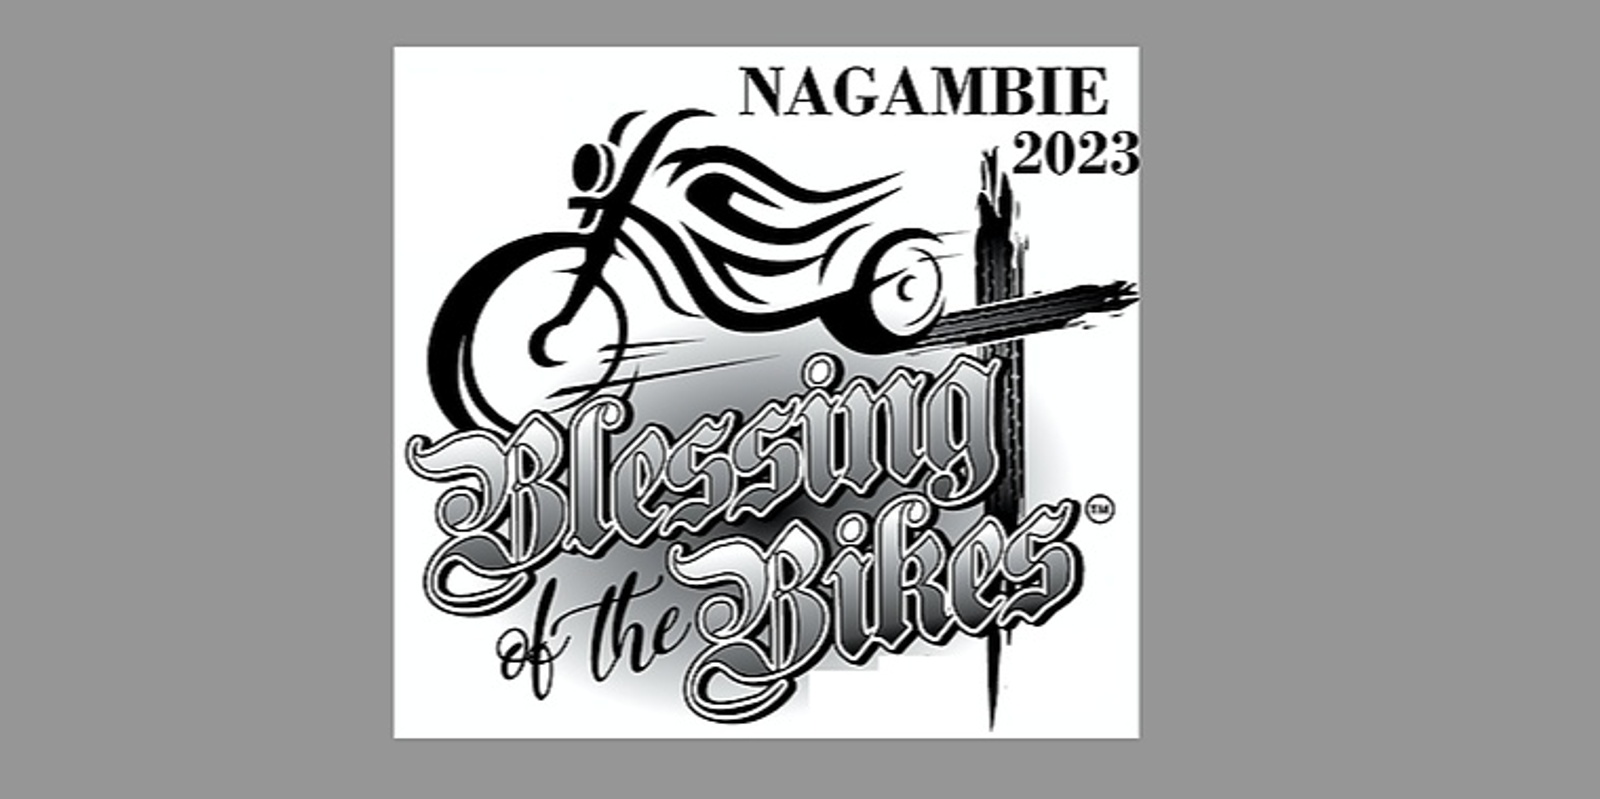 Banner image for Nagambie Blessing of the Bikes Show and Shine